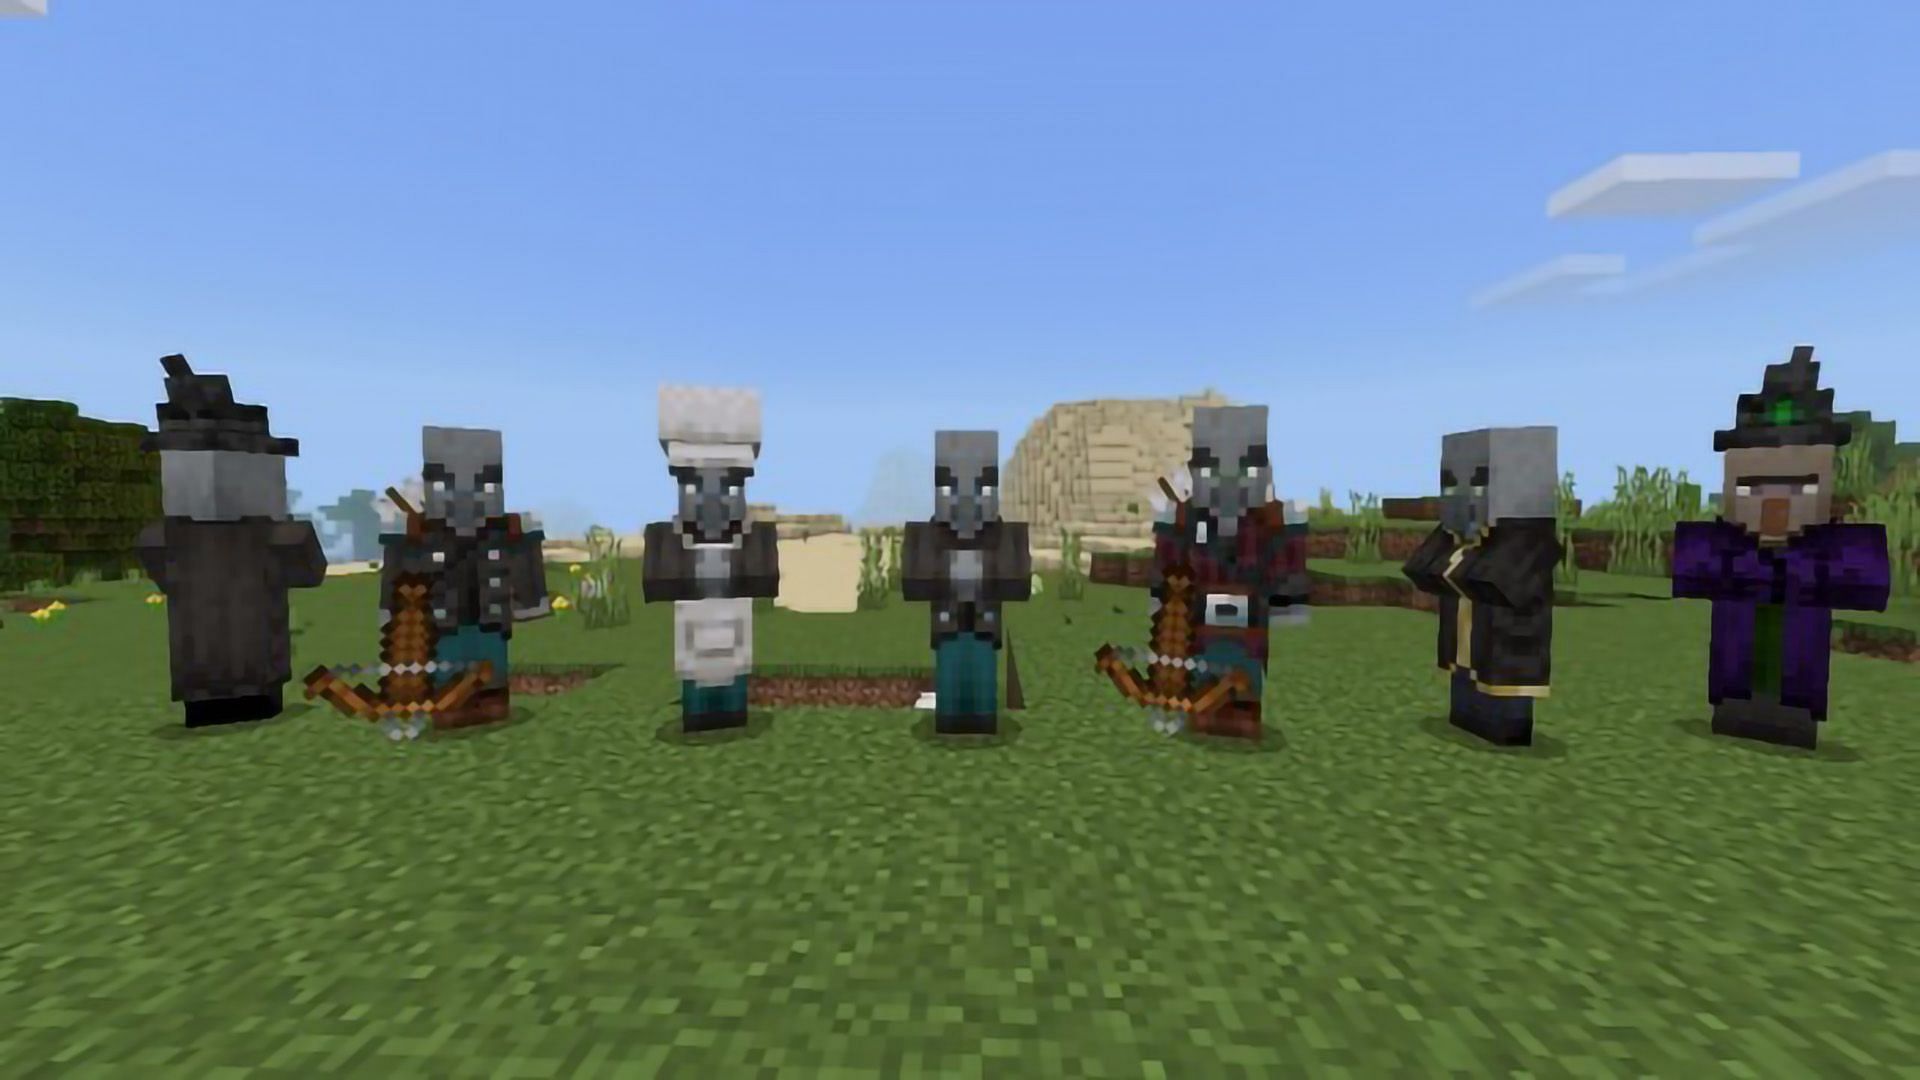 Introducing different villagers and illagers in a variety of roles (Image via mcpedl.com)